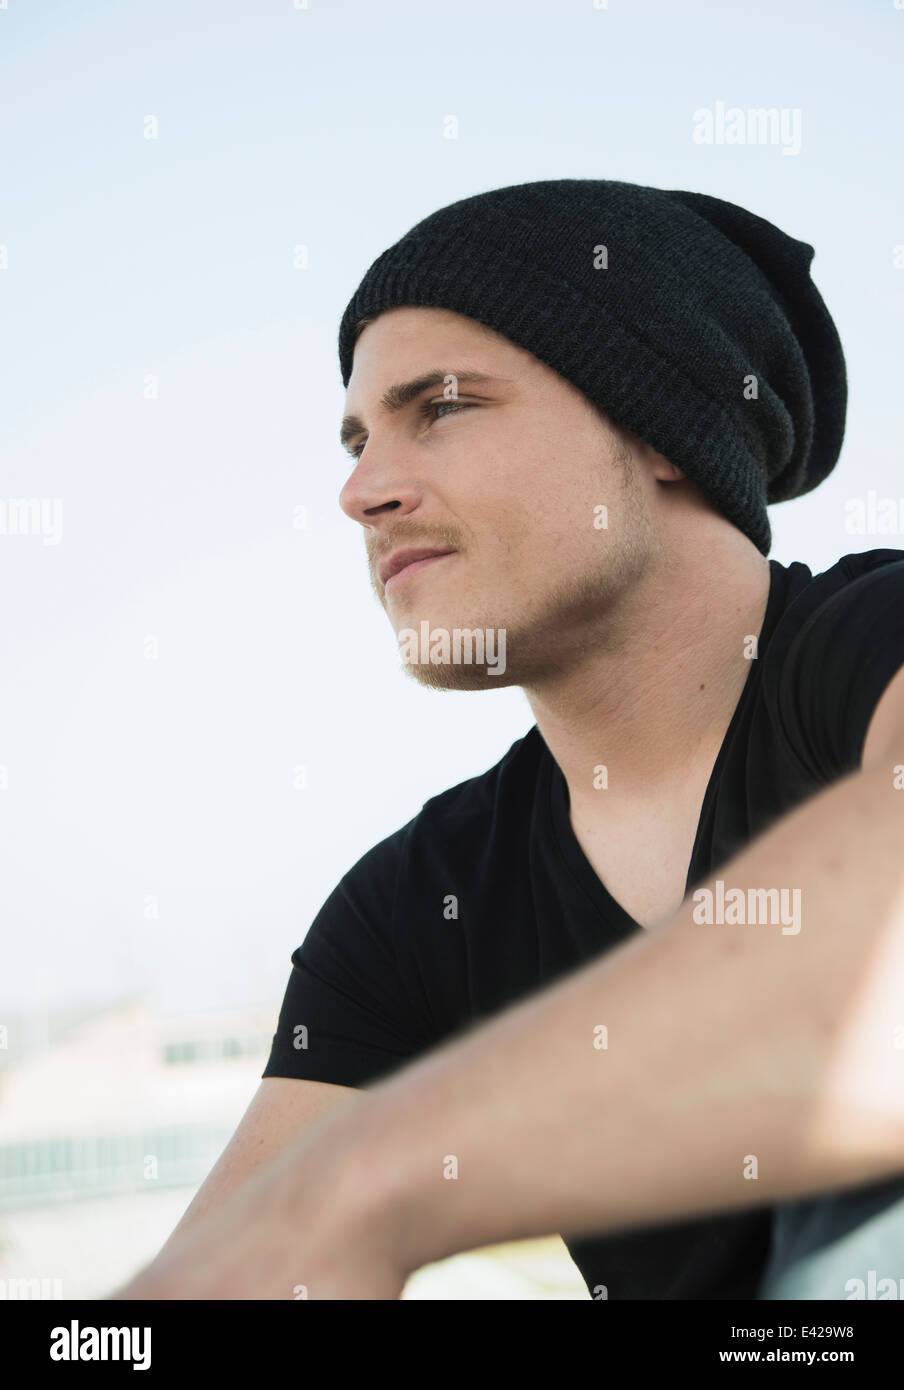 Portrait of young man wearing black tshirt and knit hat Stock Photo